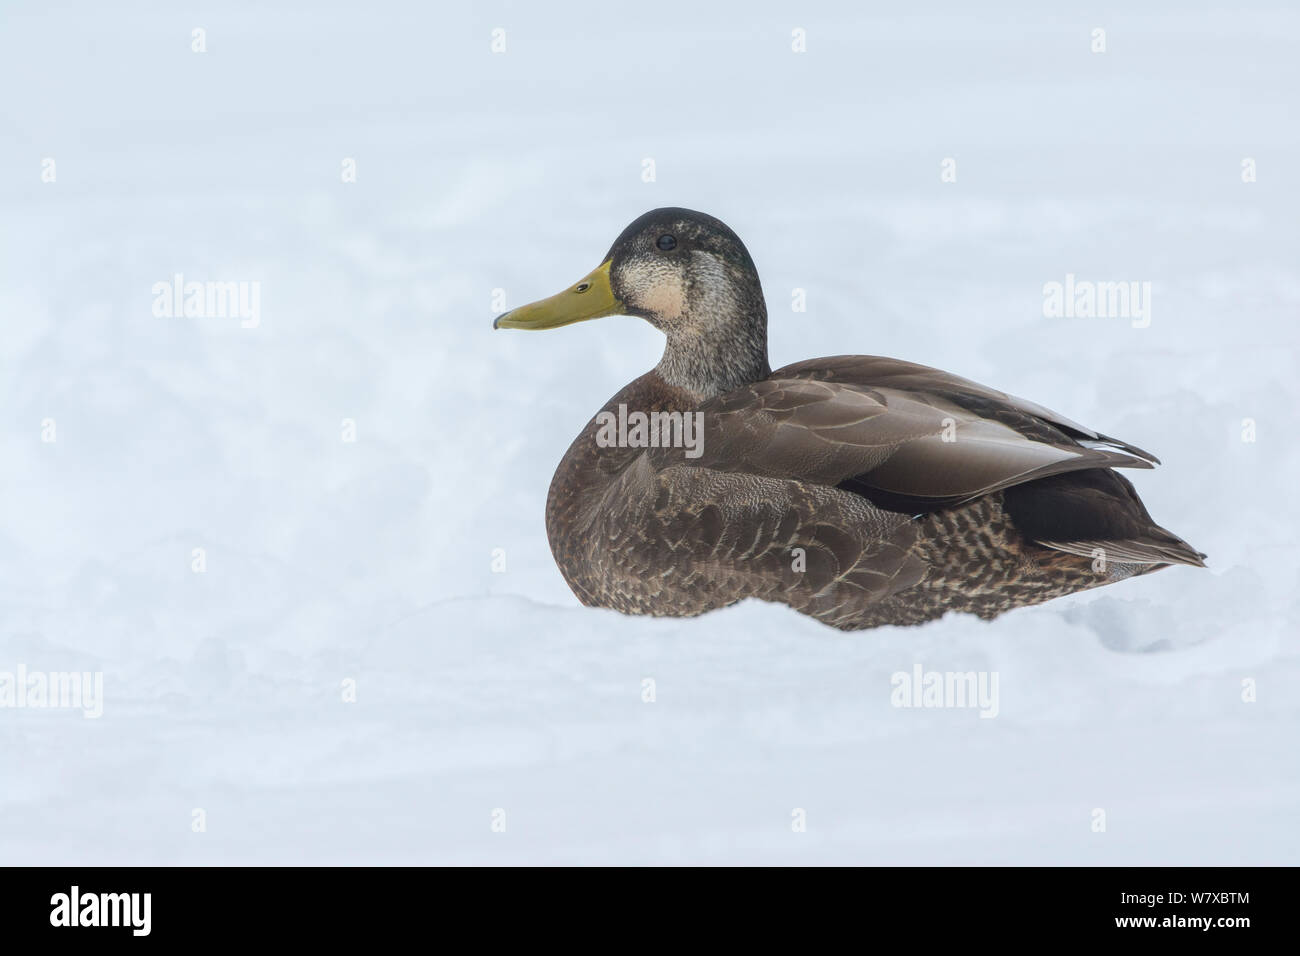 American black duck (Anas rubripes) in snow, Acadia National Park, Maine, USA, February. Stock Photo